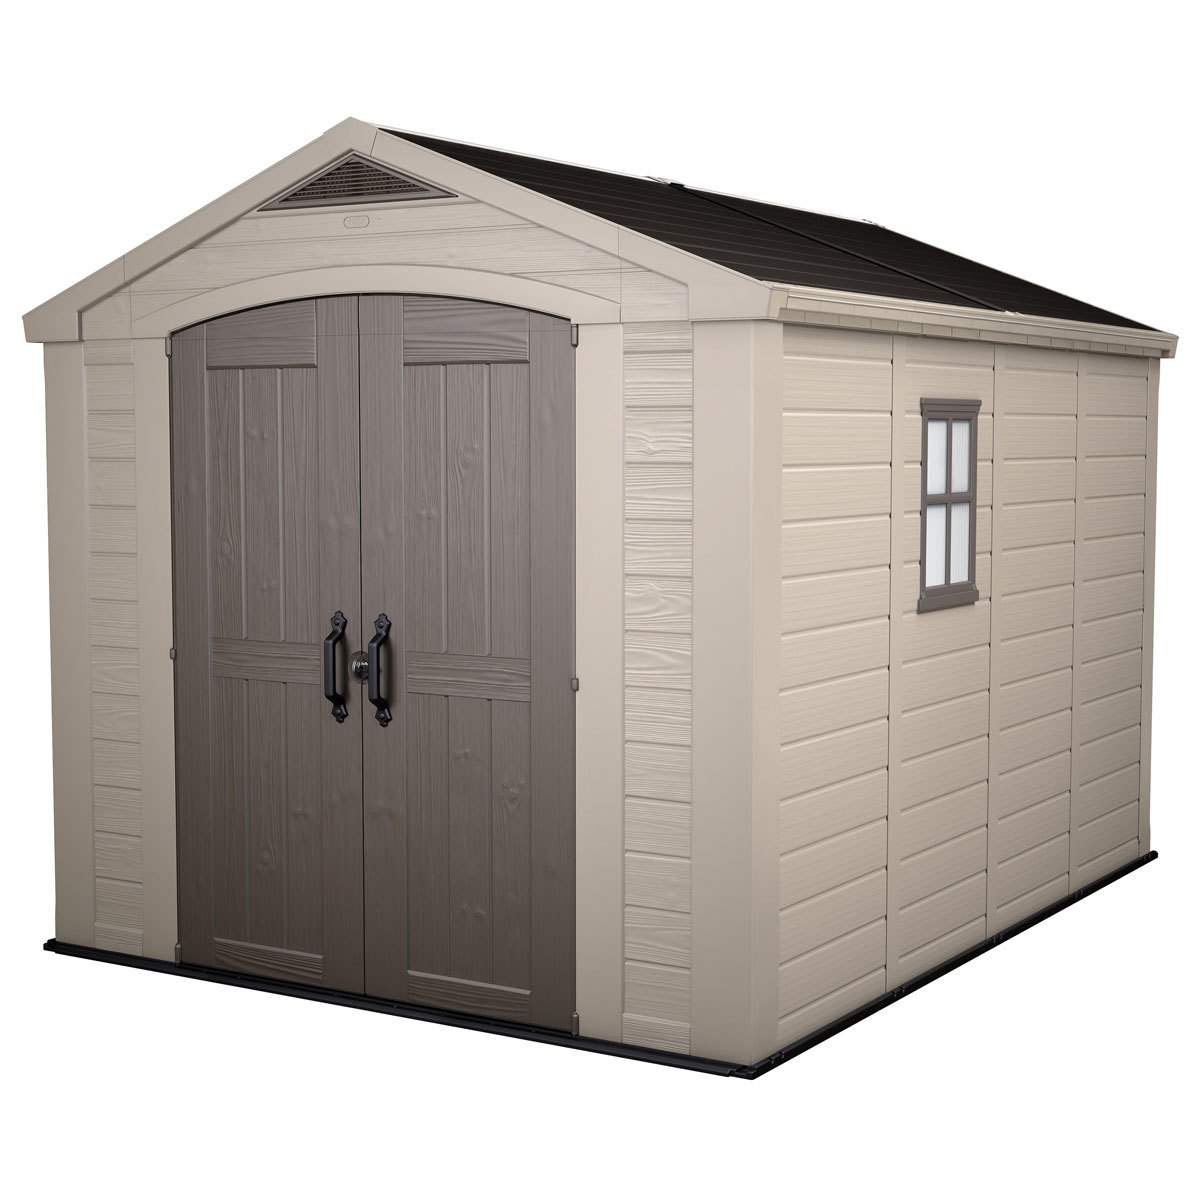 Keter Factor 8ft x 11ft (2.5 x 3.3m) Storage Shed